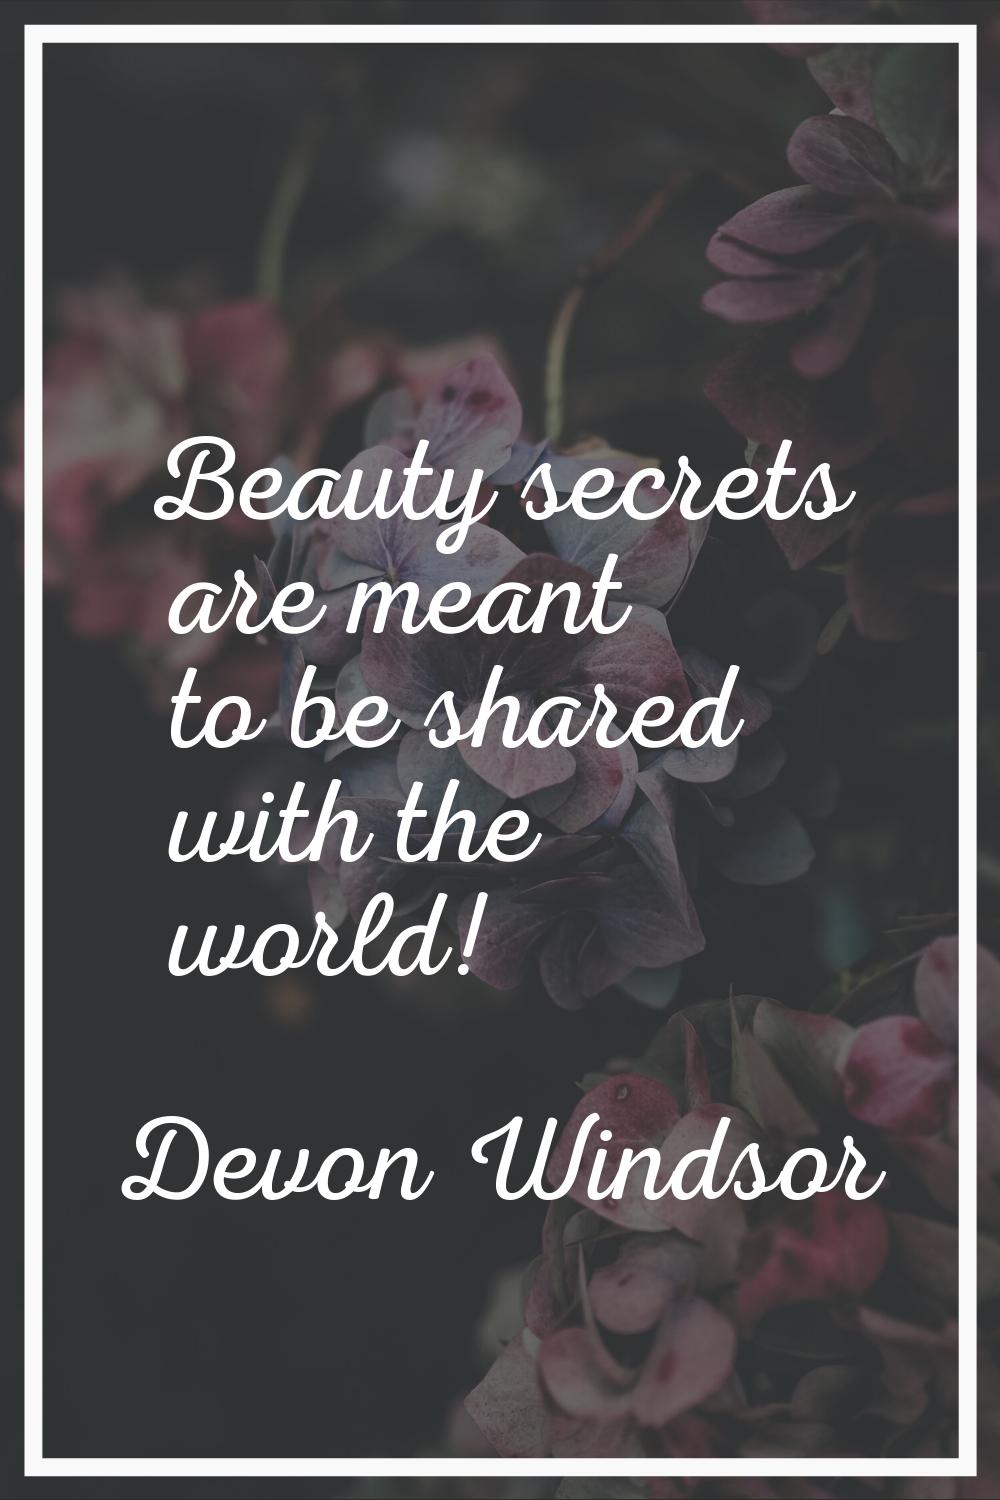 Beauty secrets are meant to be shared with the world!